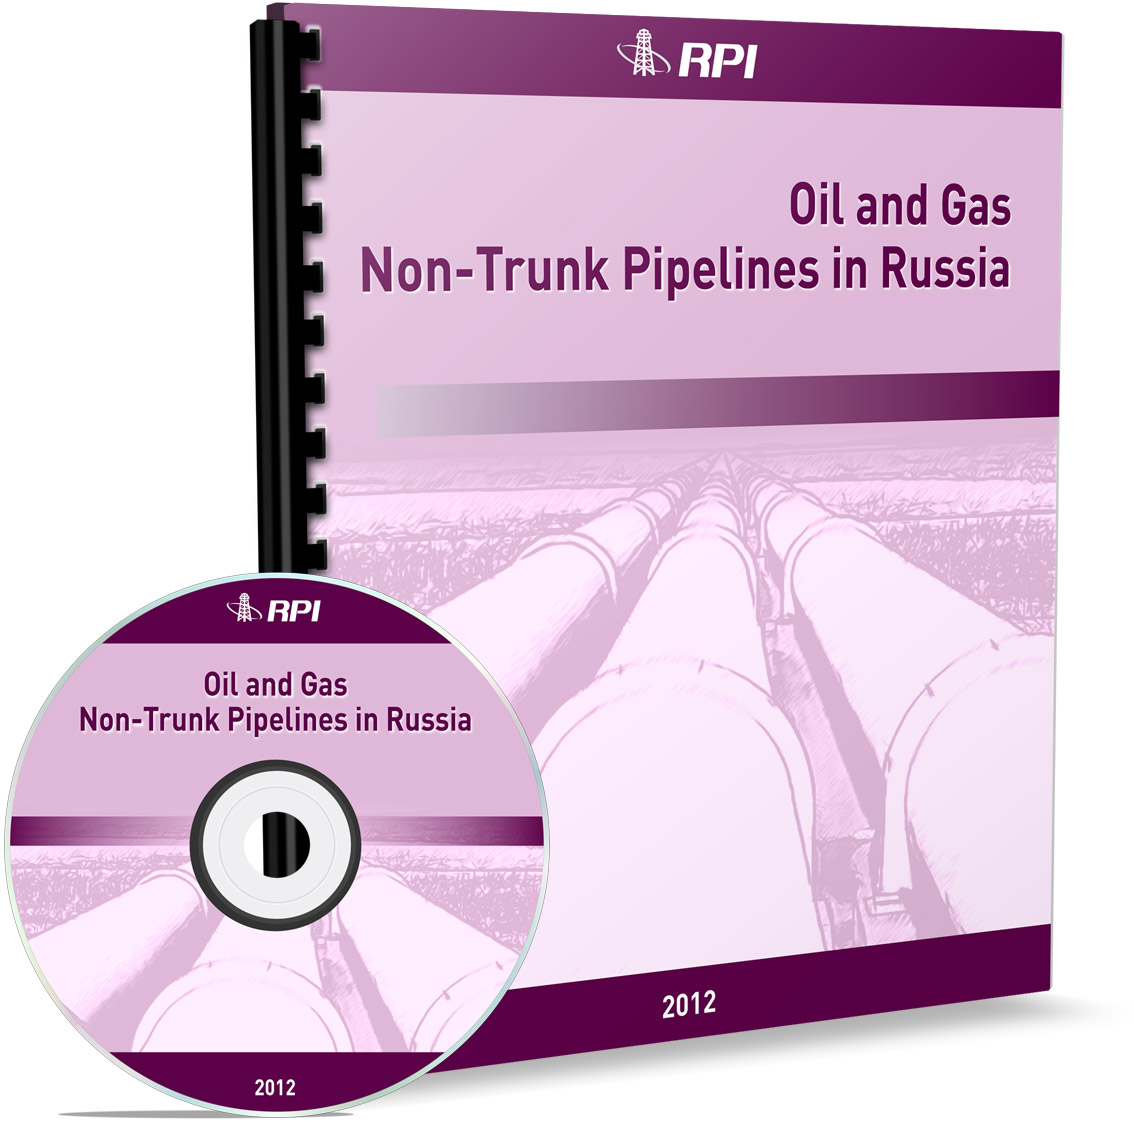 Oil and Gas Non-Trunk Pipelines in Russia